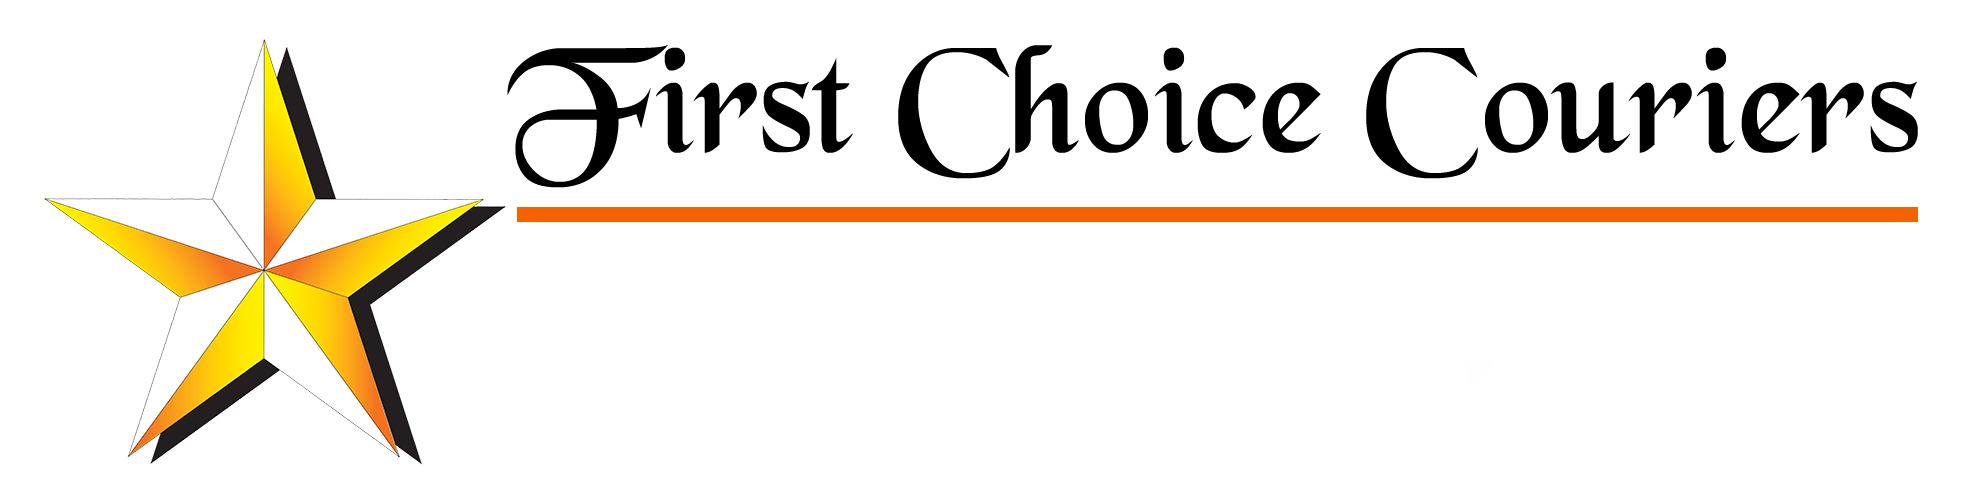 First Choice Couriers logo